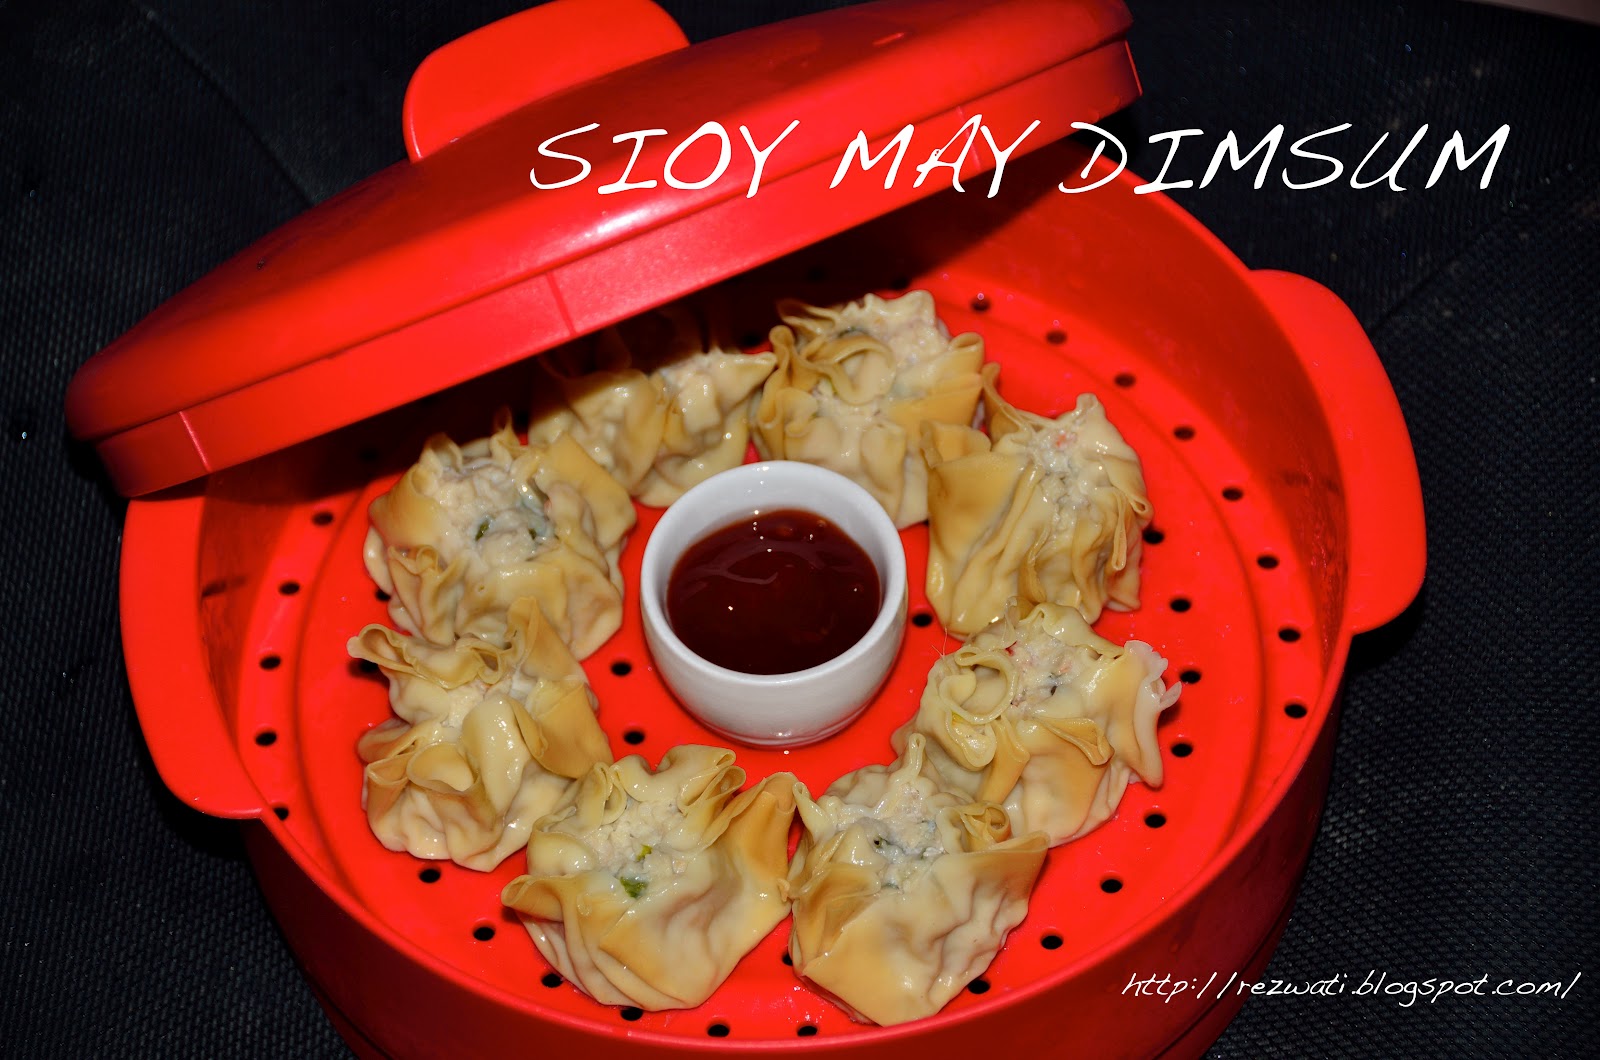 Wind of Change: Sioymay dimsum